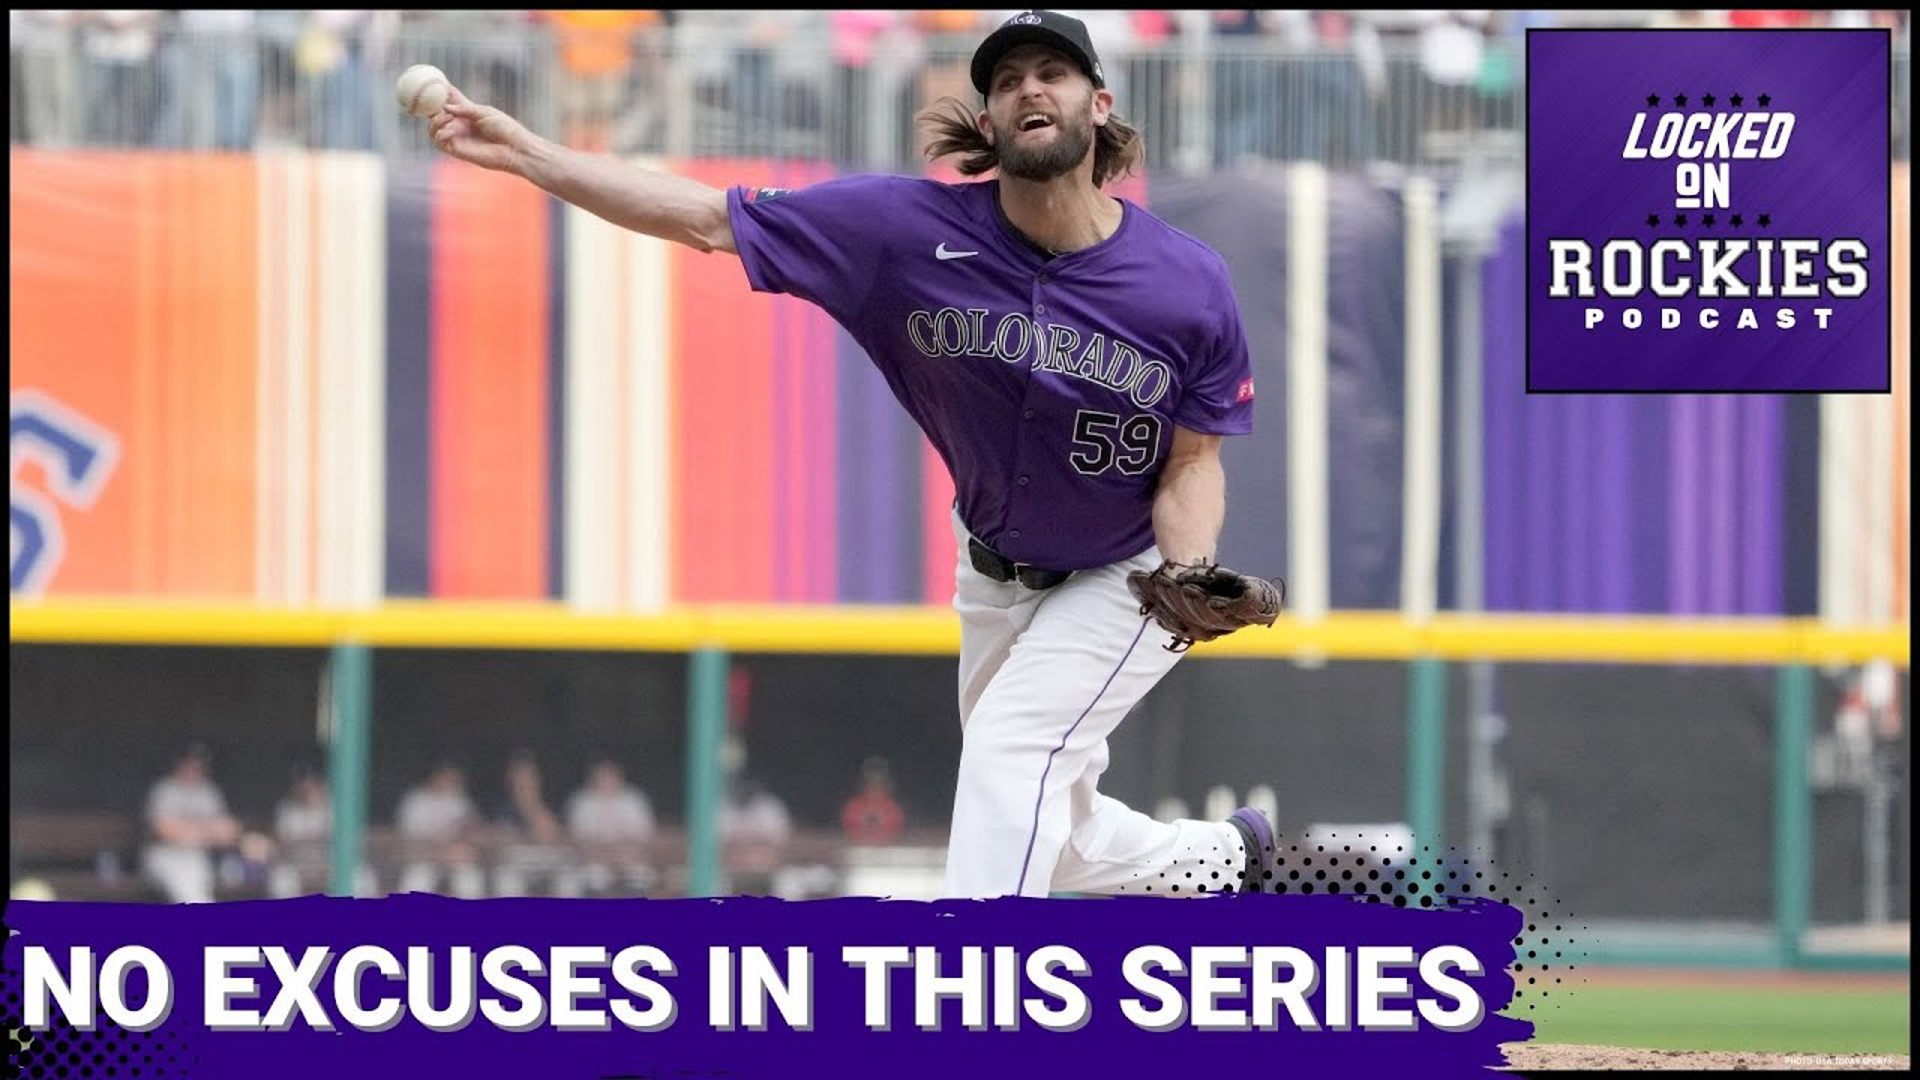 The Colorado Rockies were voted the worst team in baseball by the Locked On Network. Have they earned that title?